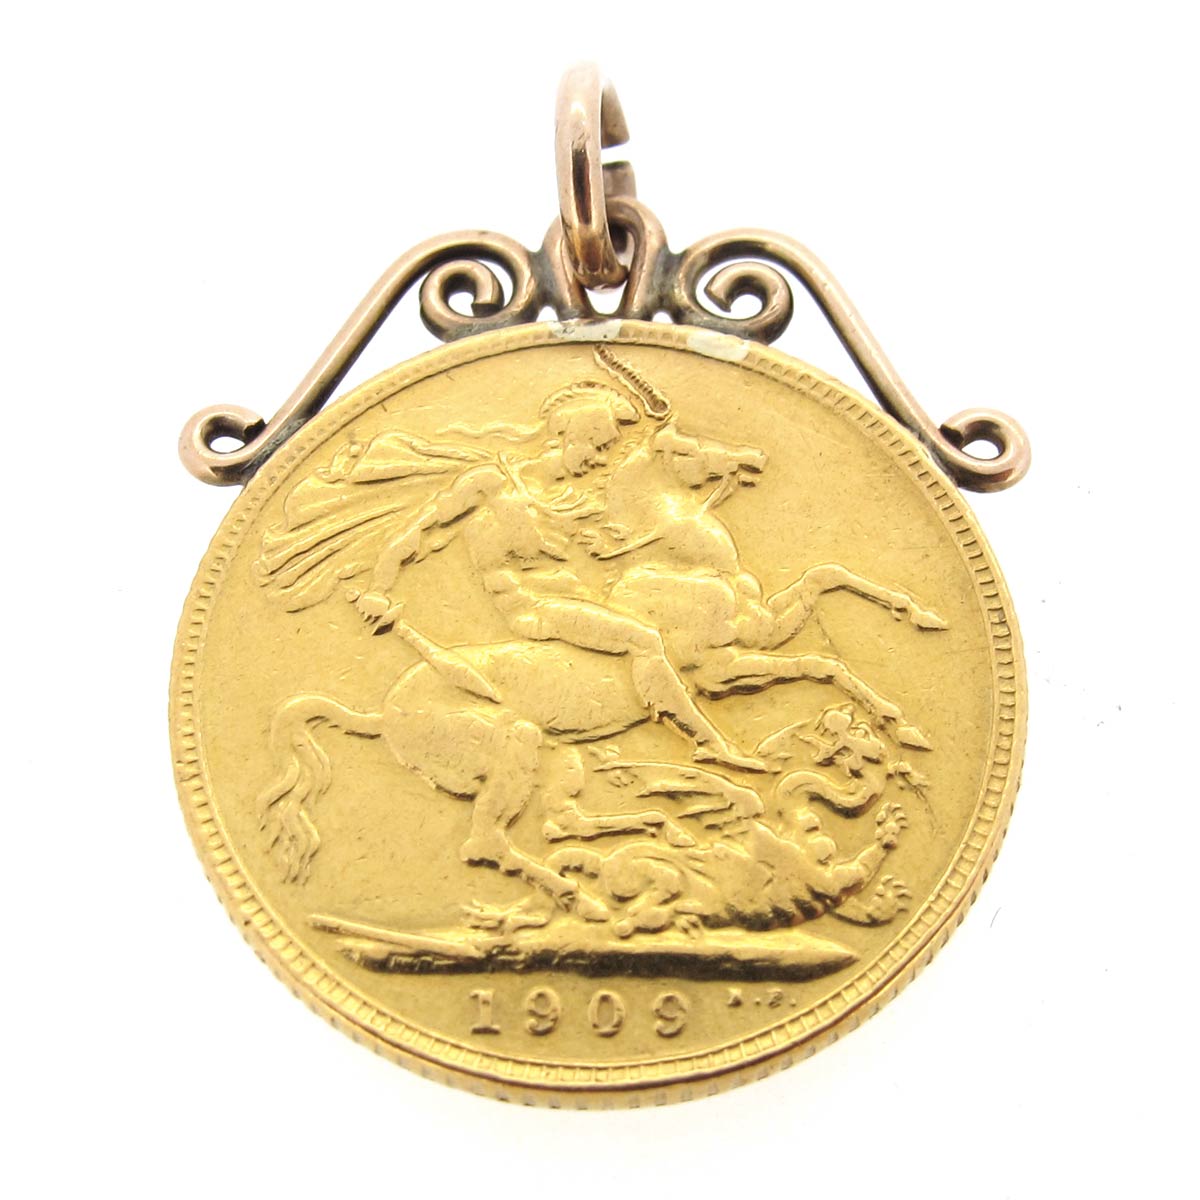 Buy 1958 Gold Sovereign Coin Pendant Vintage Sovereign in Gold Pendant  Frame Vintage Jewelry Vintage Coin Gold Coin Pendant Sovereign Online in  India - Etsy